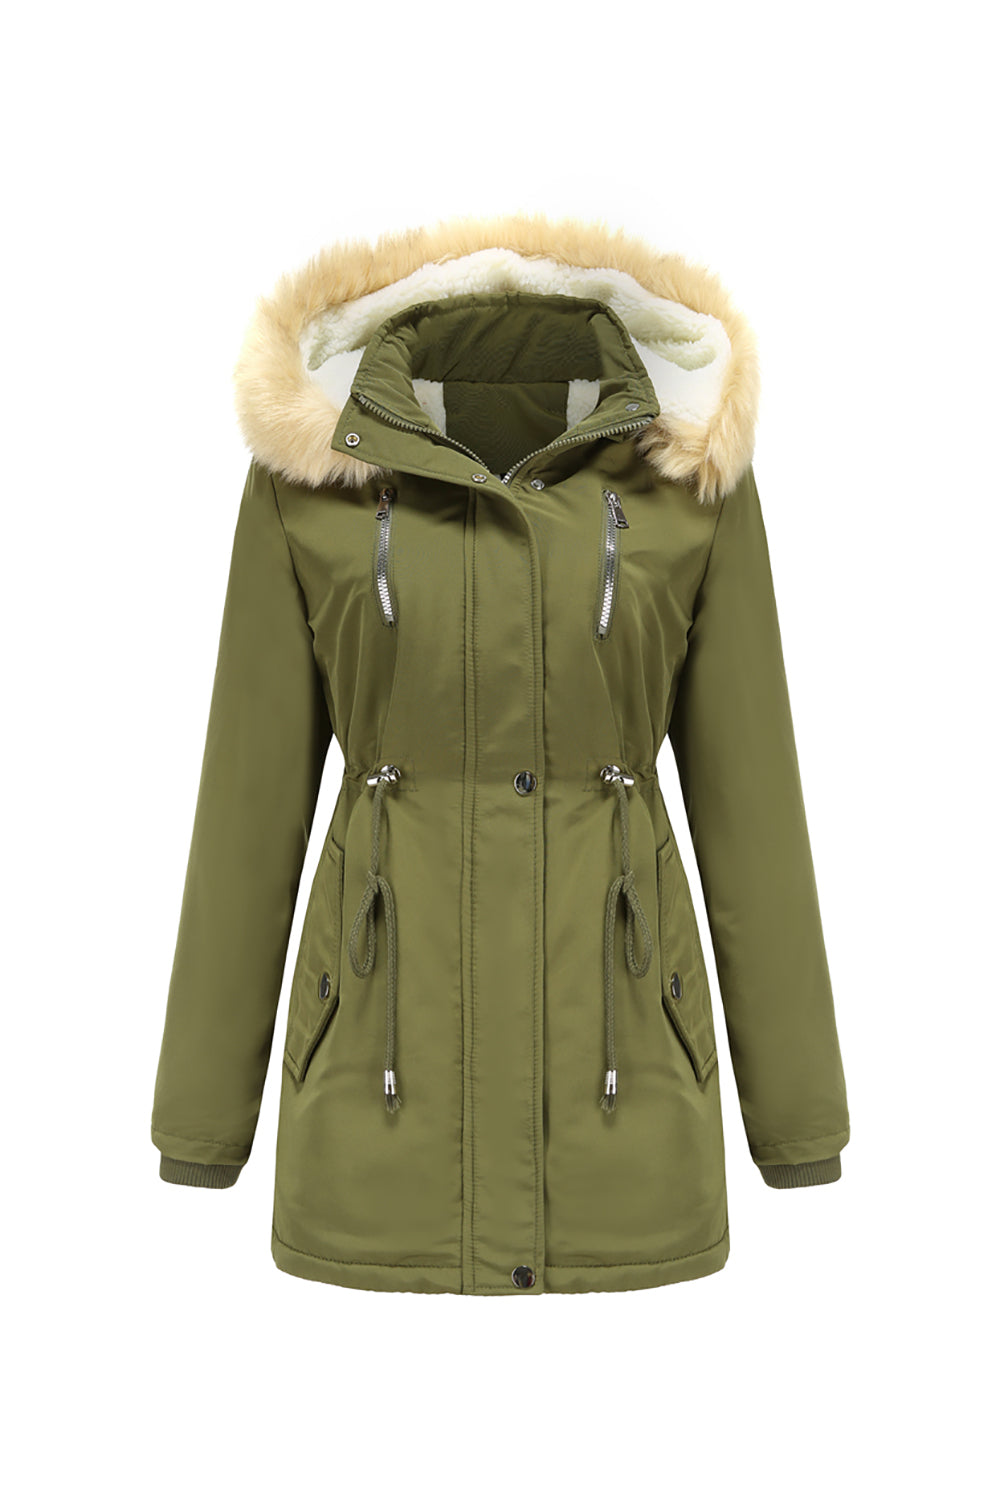 Thickened Army Green Drawstring Hooded Mid Coat